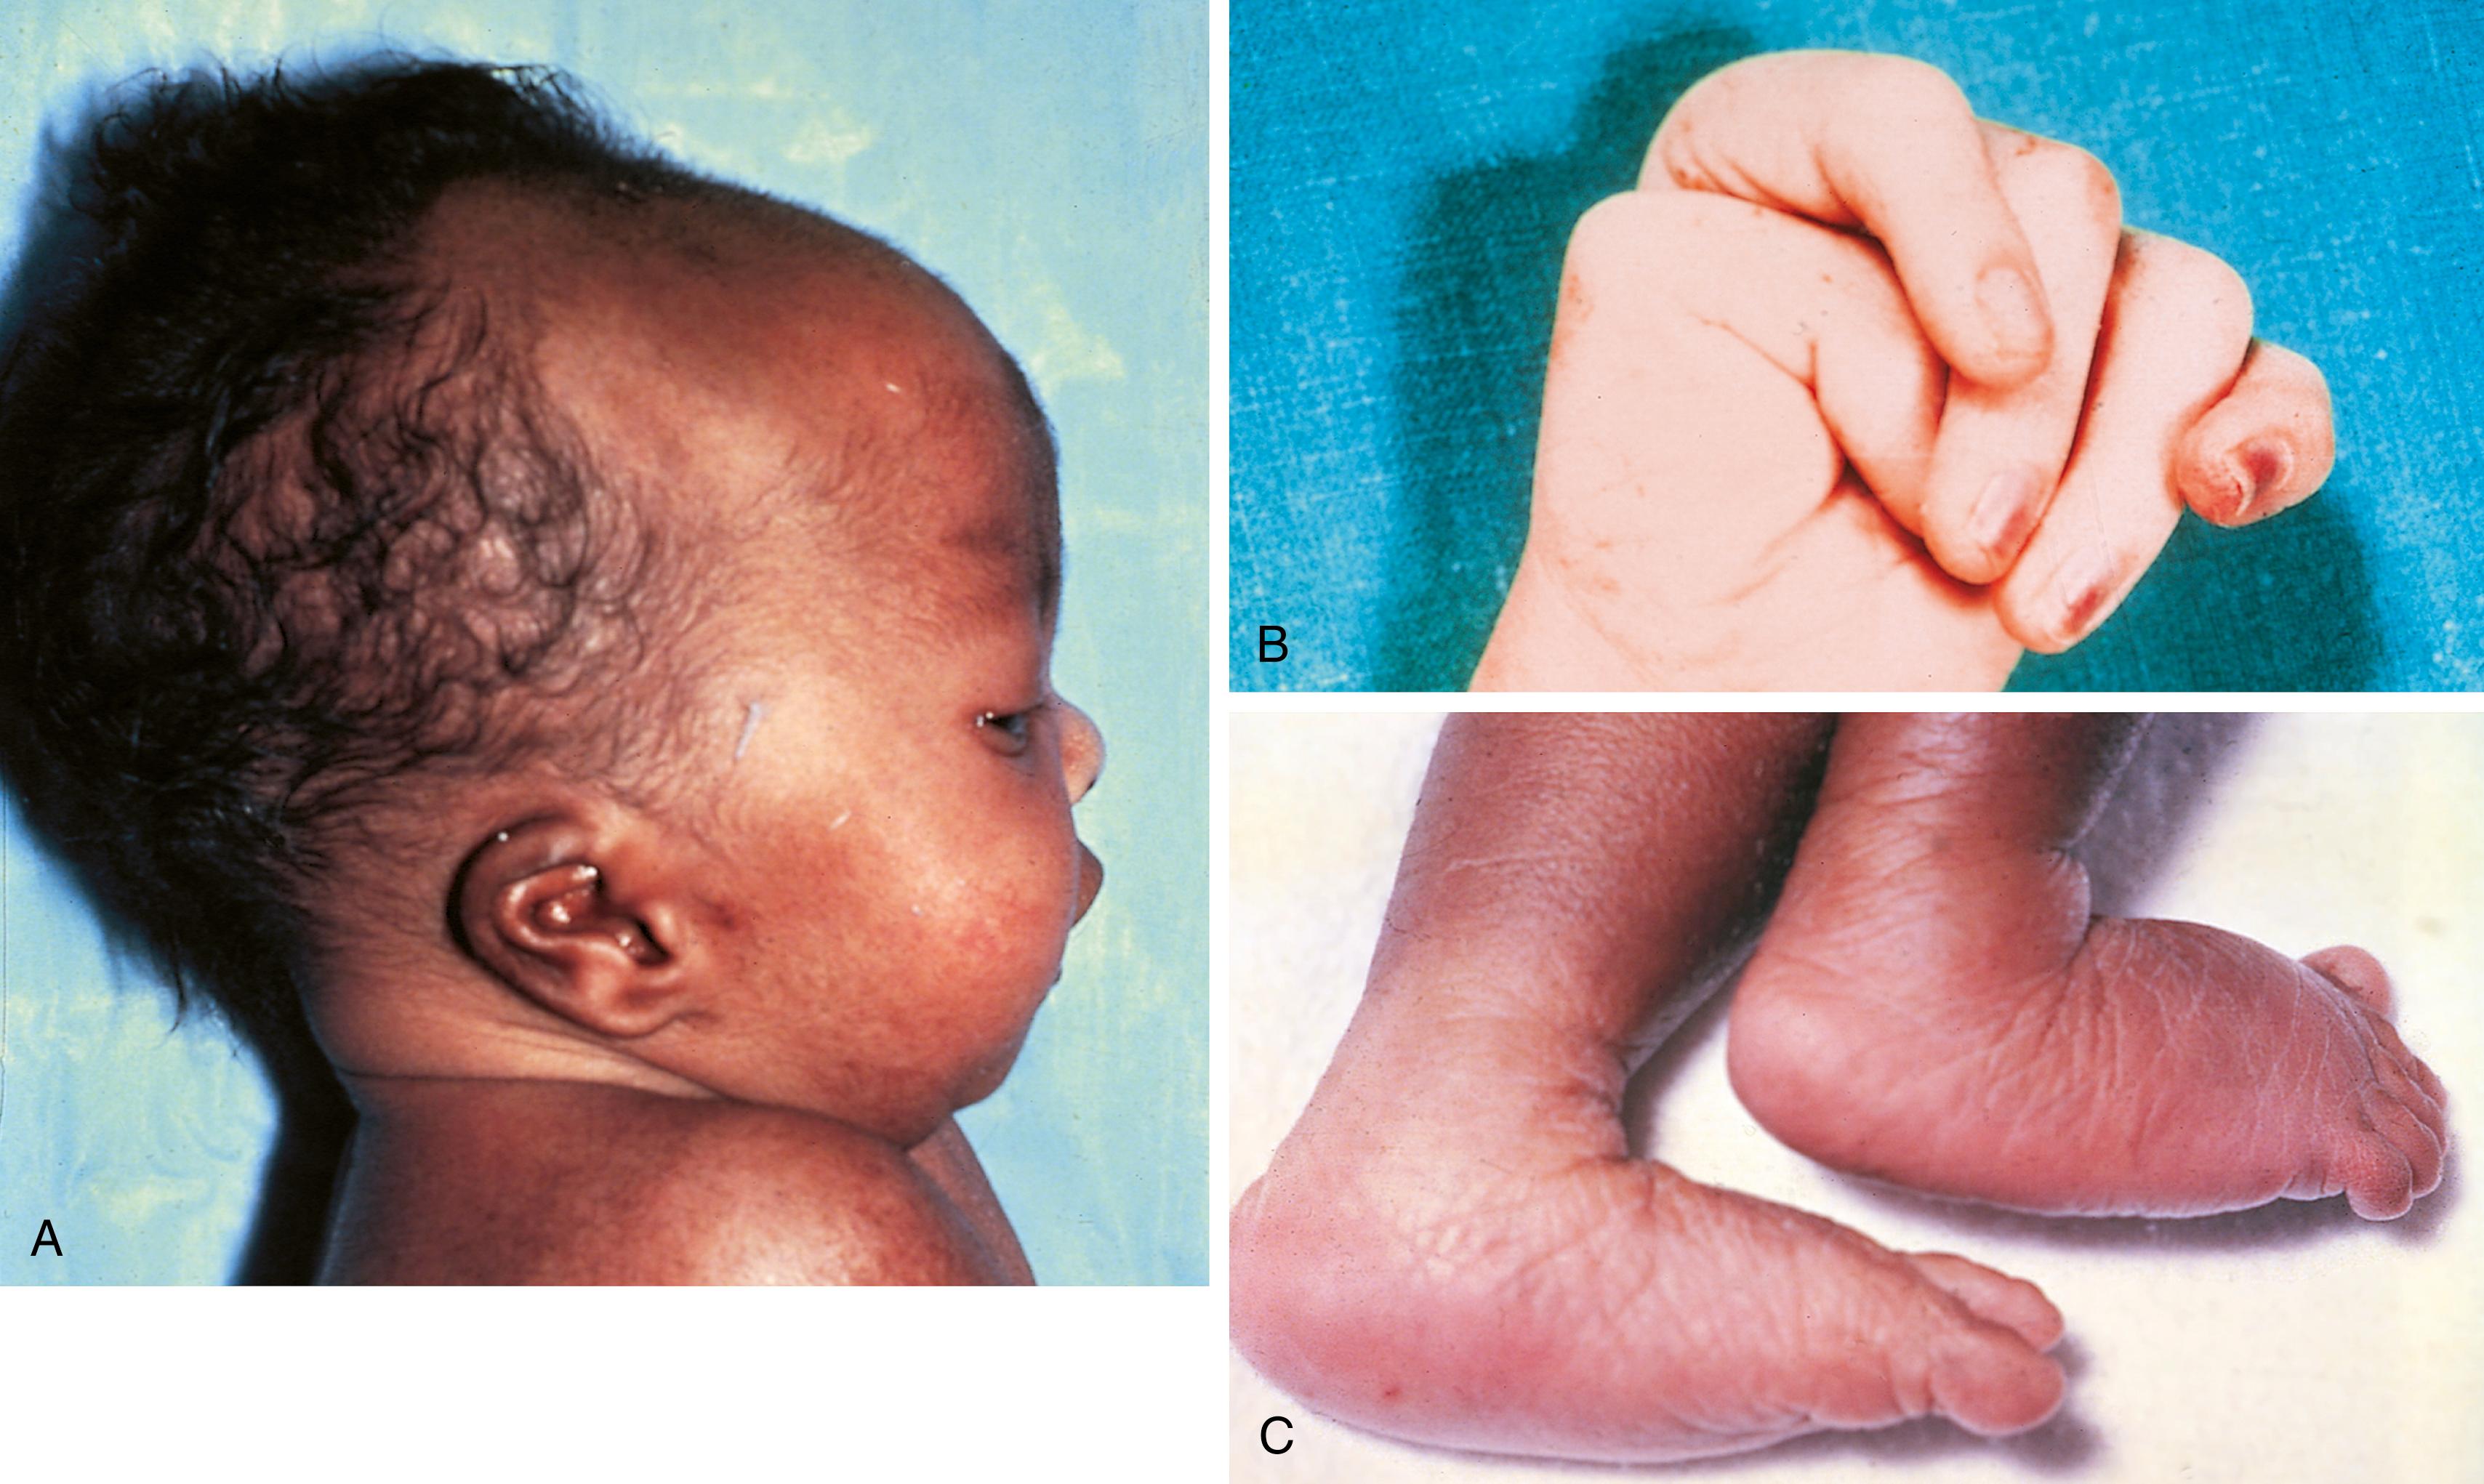 Fig. 1.17, Several physical manifestations of trisomy 18. (A) Typical profile reveals prominent occiput and low-set, posteriorly rotated malformed auricles. (B) Clenched hand showing typical pattern of overlapping fingers. (C) Rocker-bottom feet.